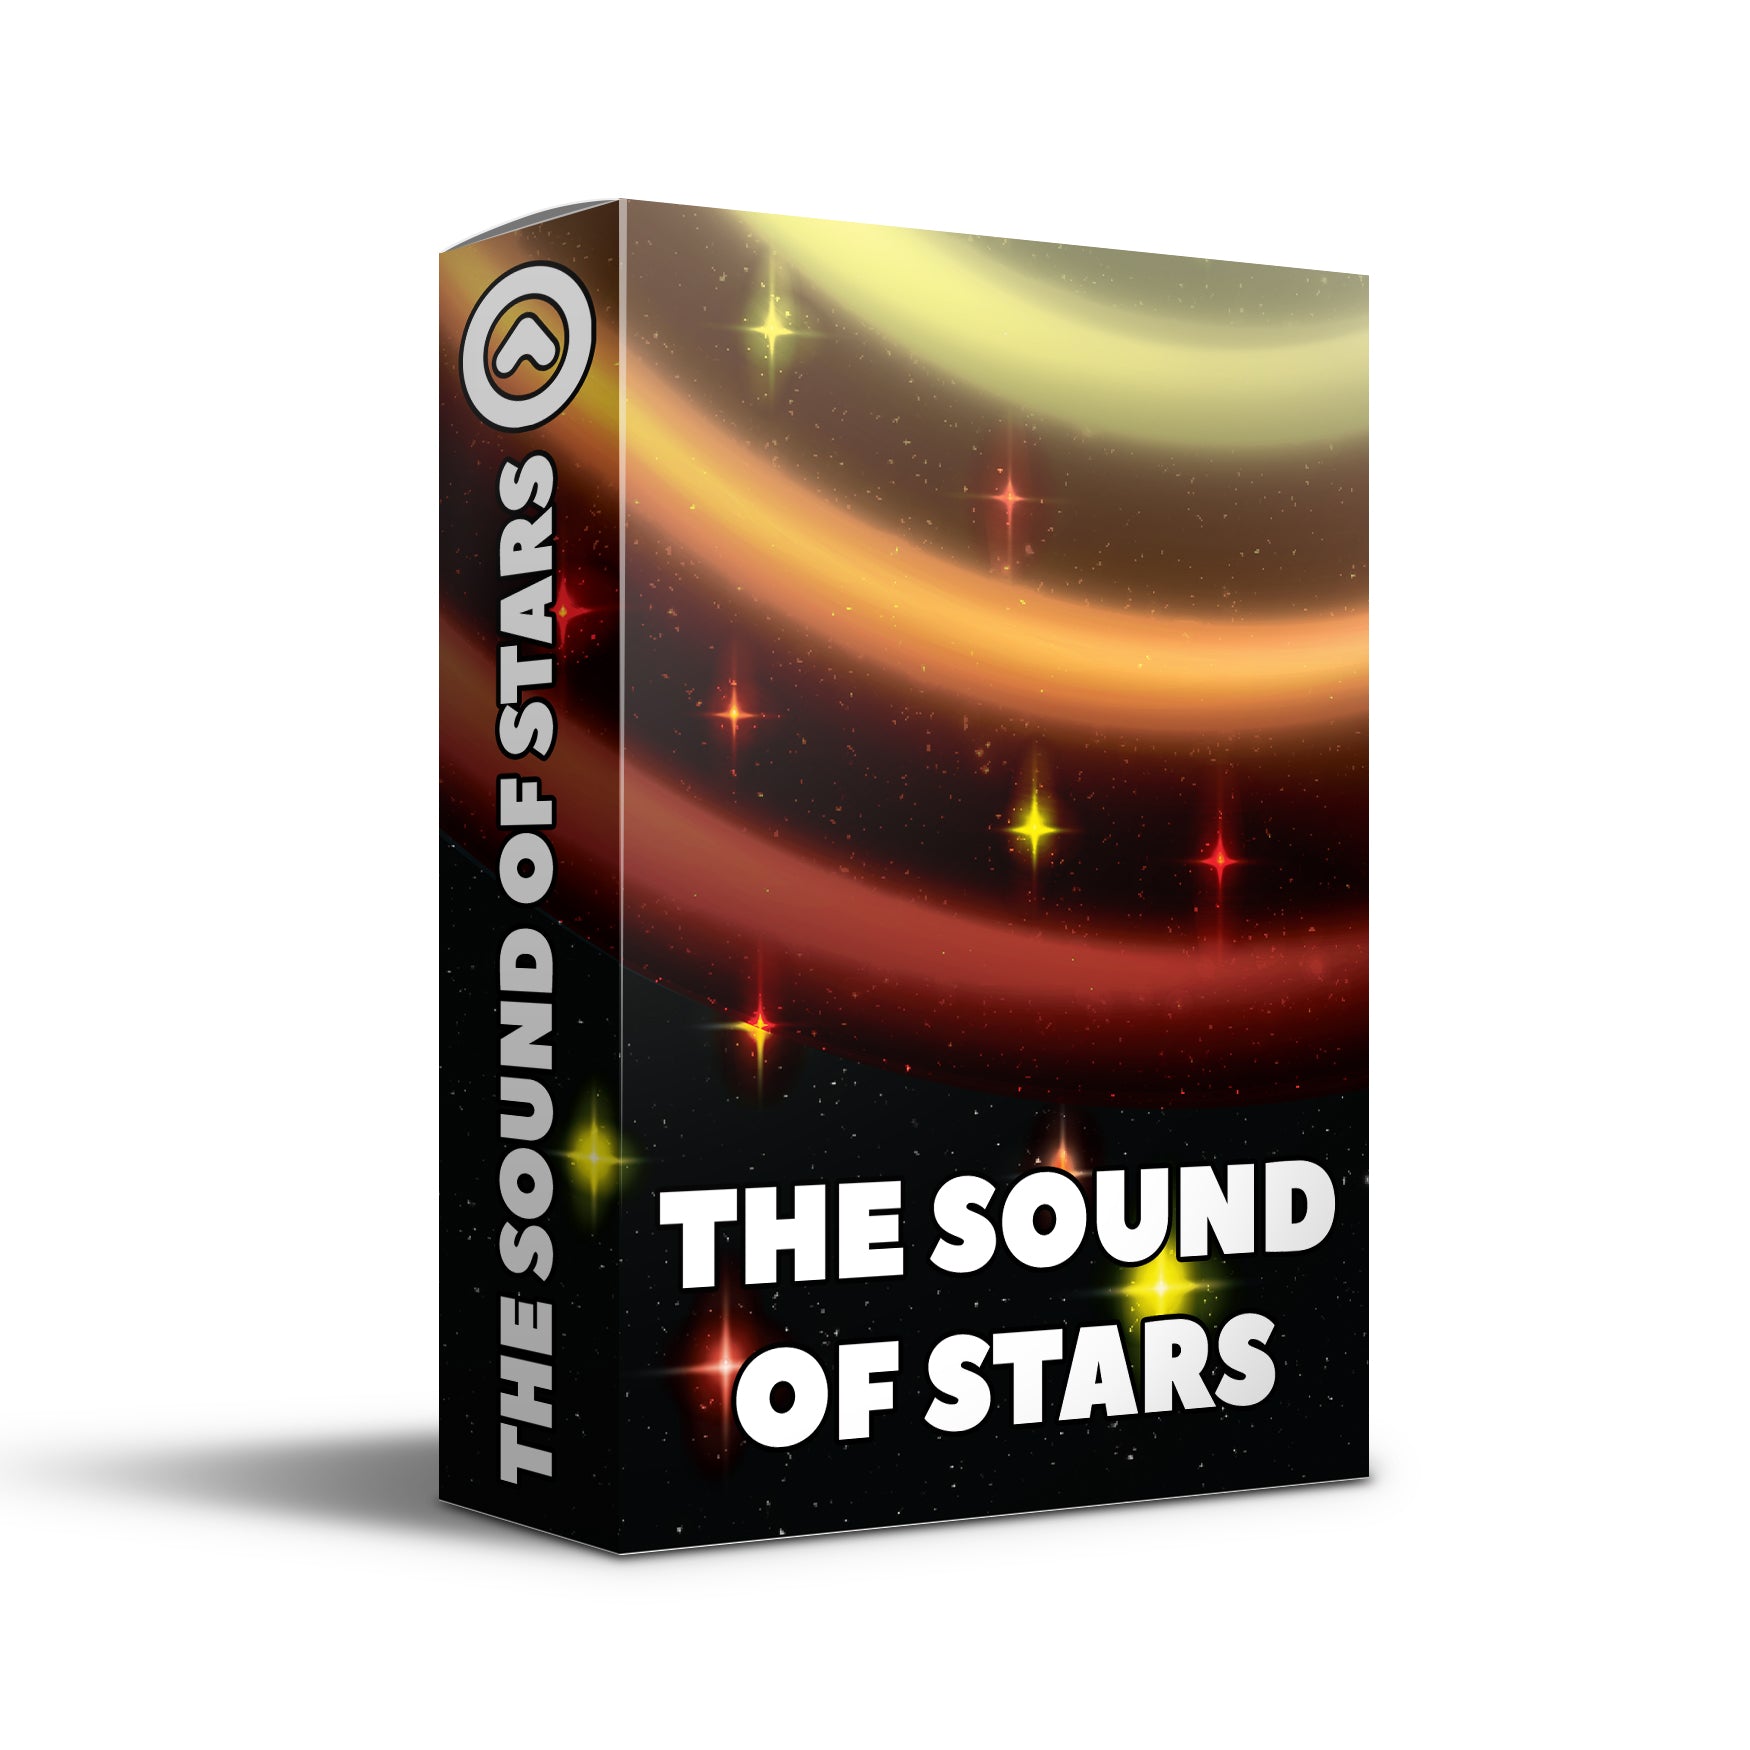 INDOOR PERCUSSION MUSIC - THE SOUND OF STARS